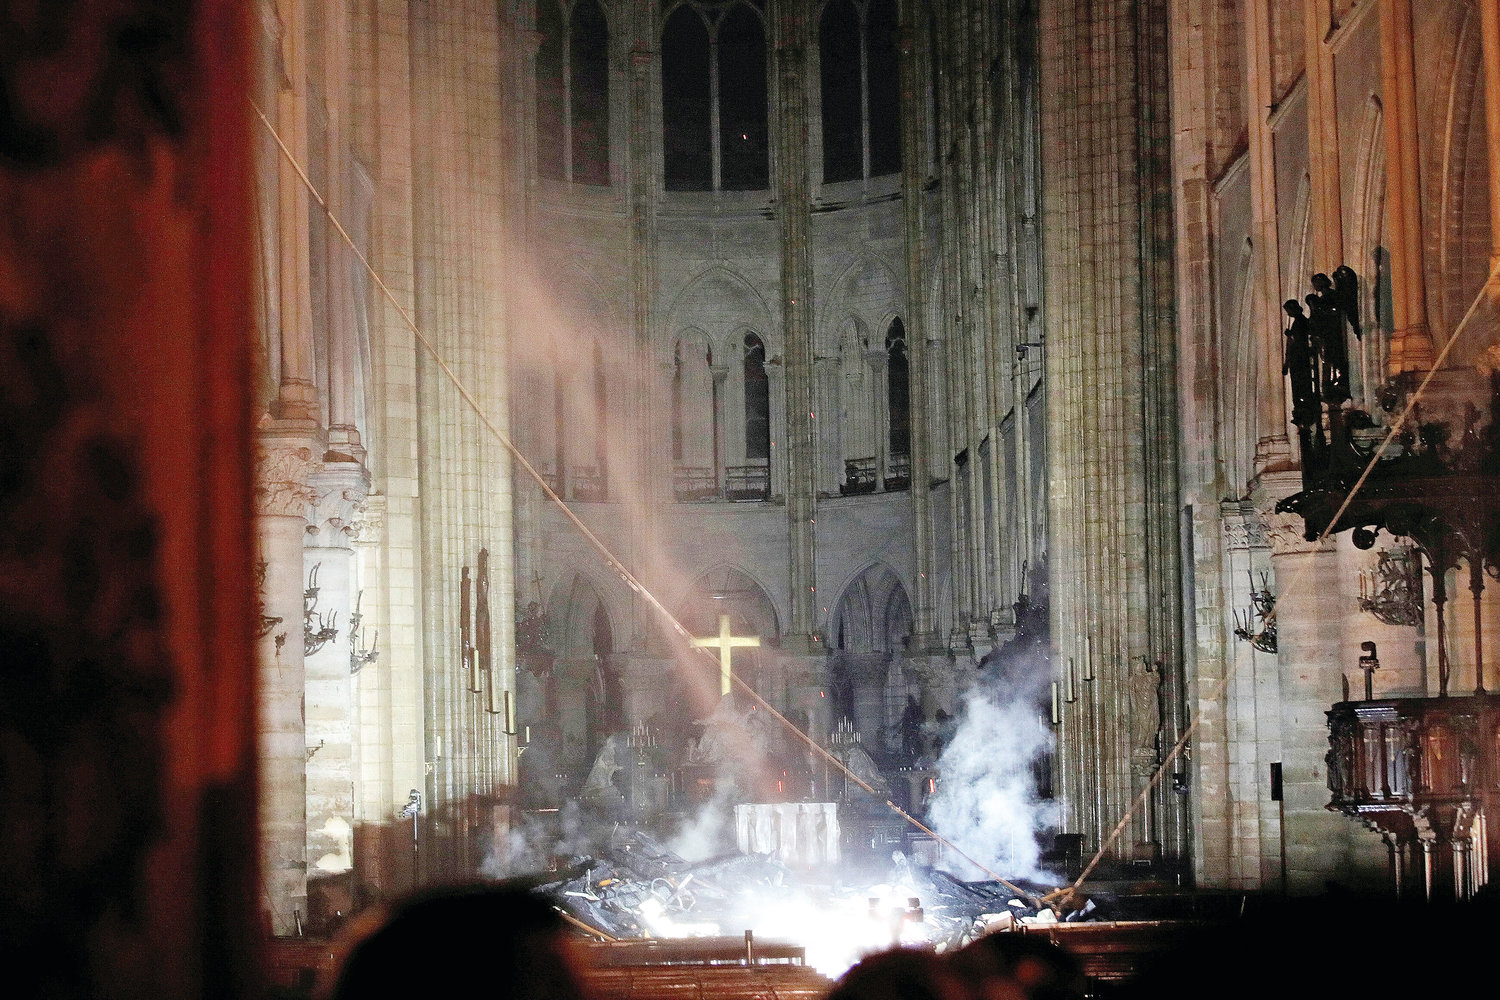 Smoke rises around the altar inside Notre Dame Cathedral in Paris as a fire continues to smolder early April 16, 2019. Officials said the cause was not clear, but that the fire could be linked to renovation work.